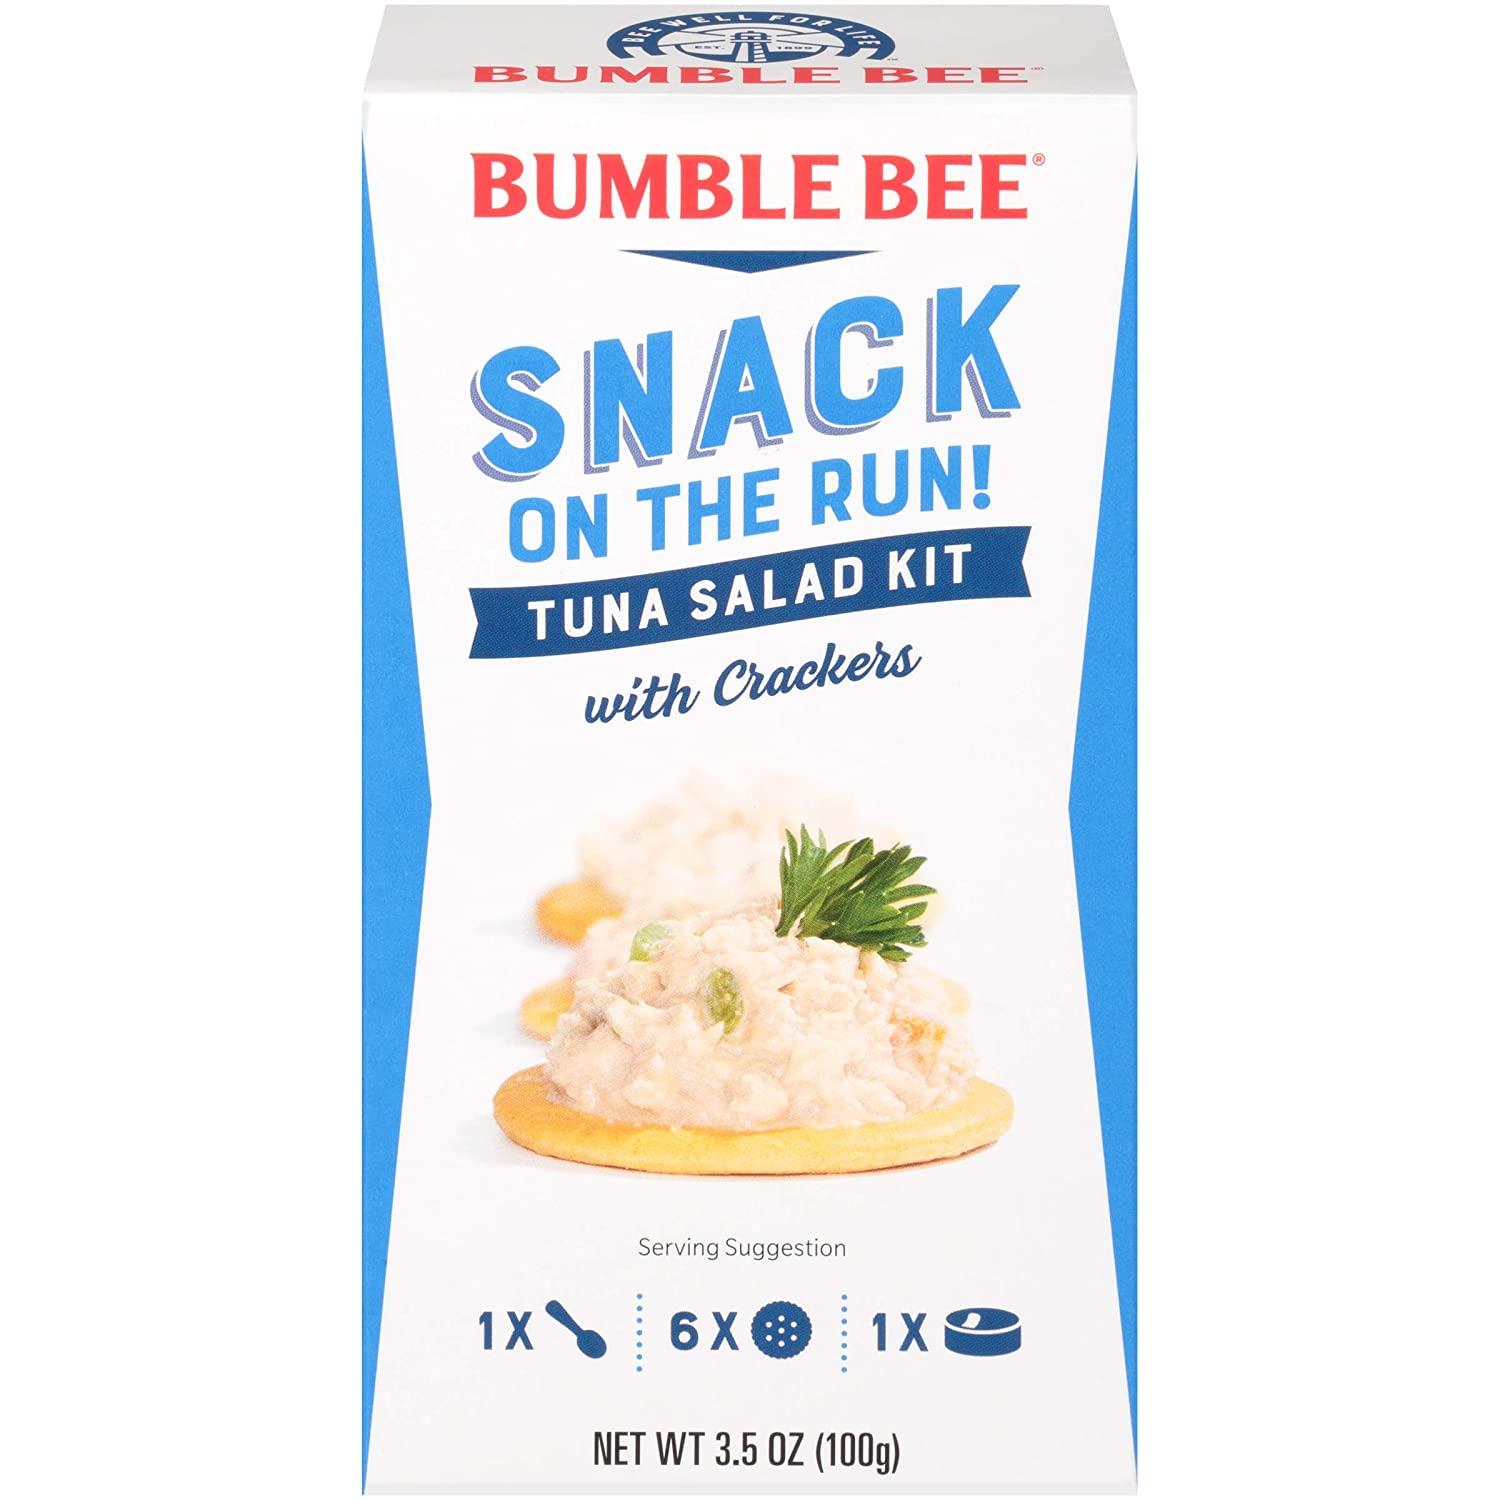 12 Bumble Bee Snack On The Run Tuna Salad with Crackers for $10.09 Shipped